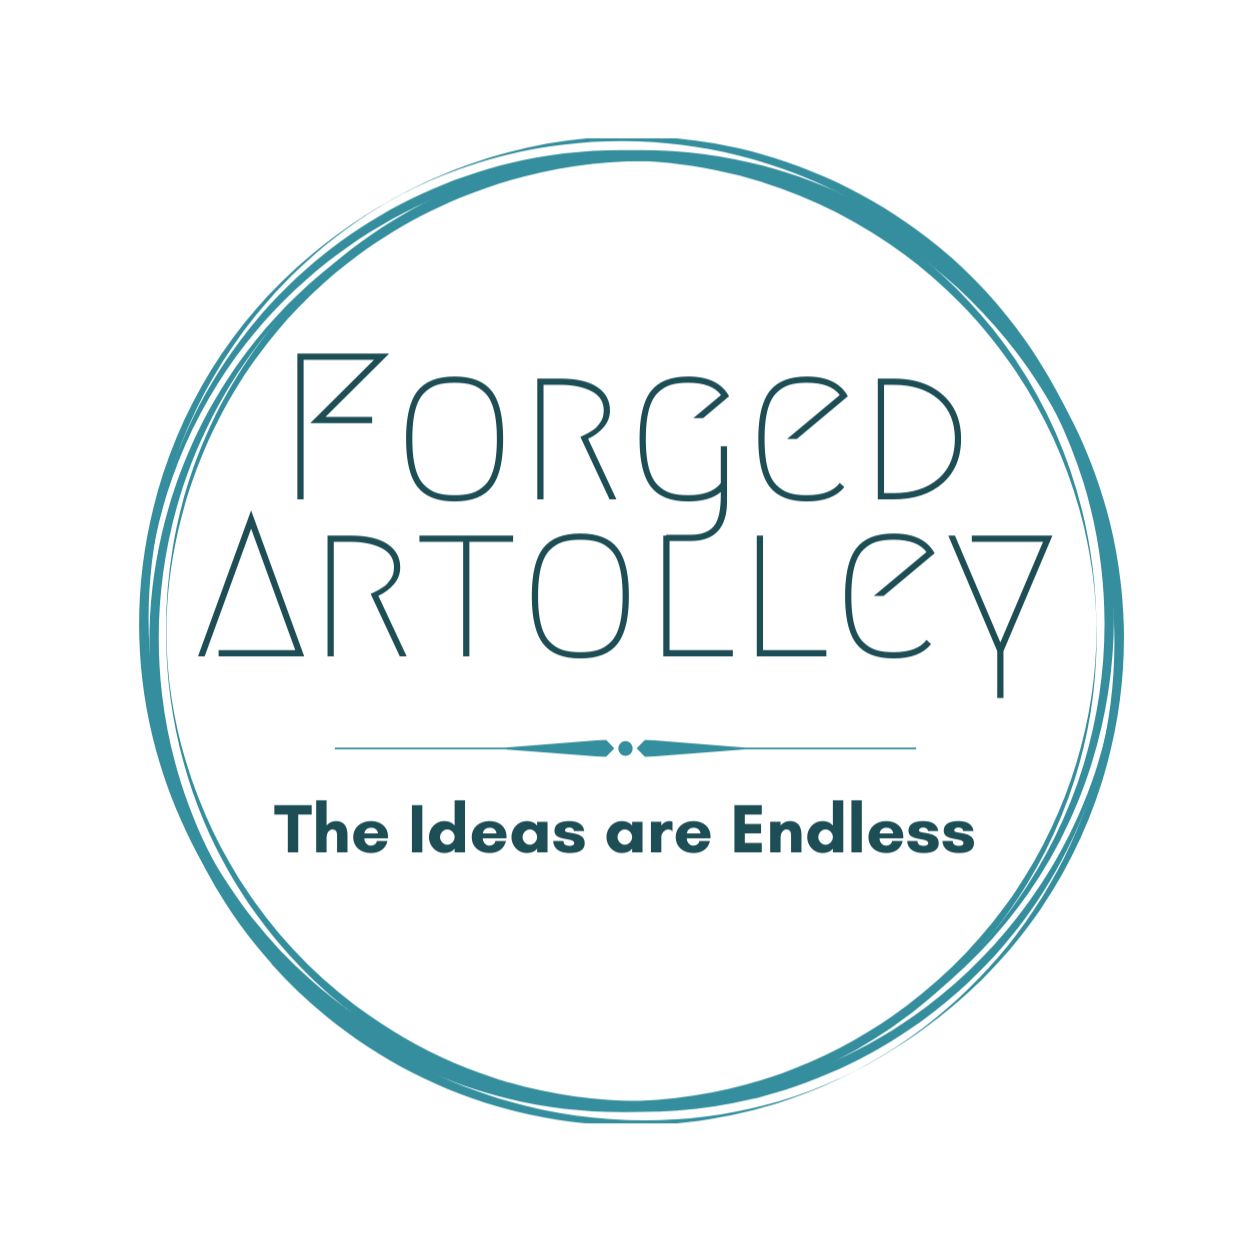 Forged ARTolley's images